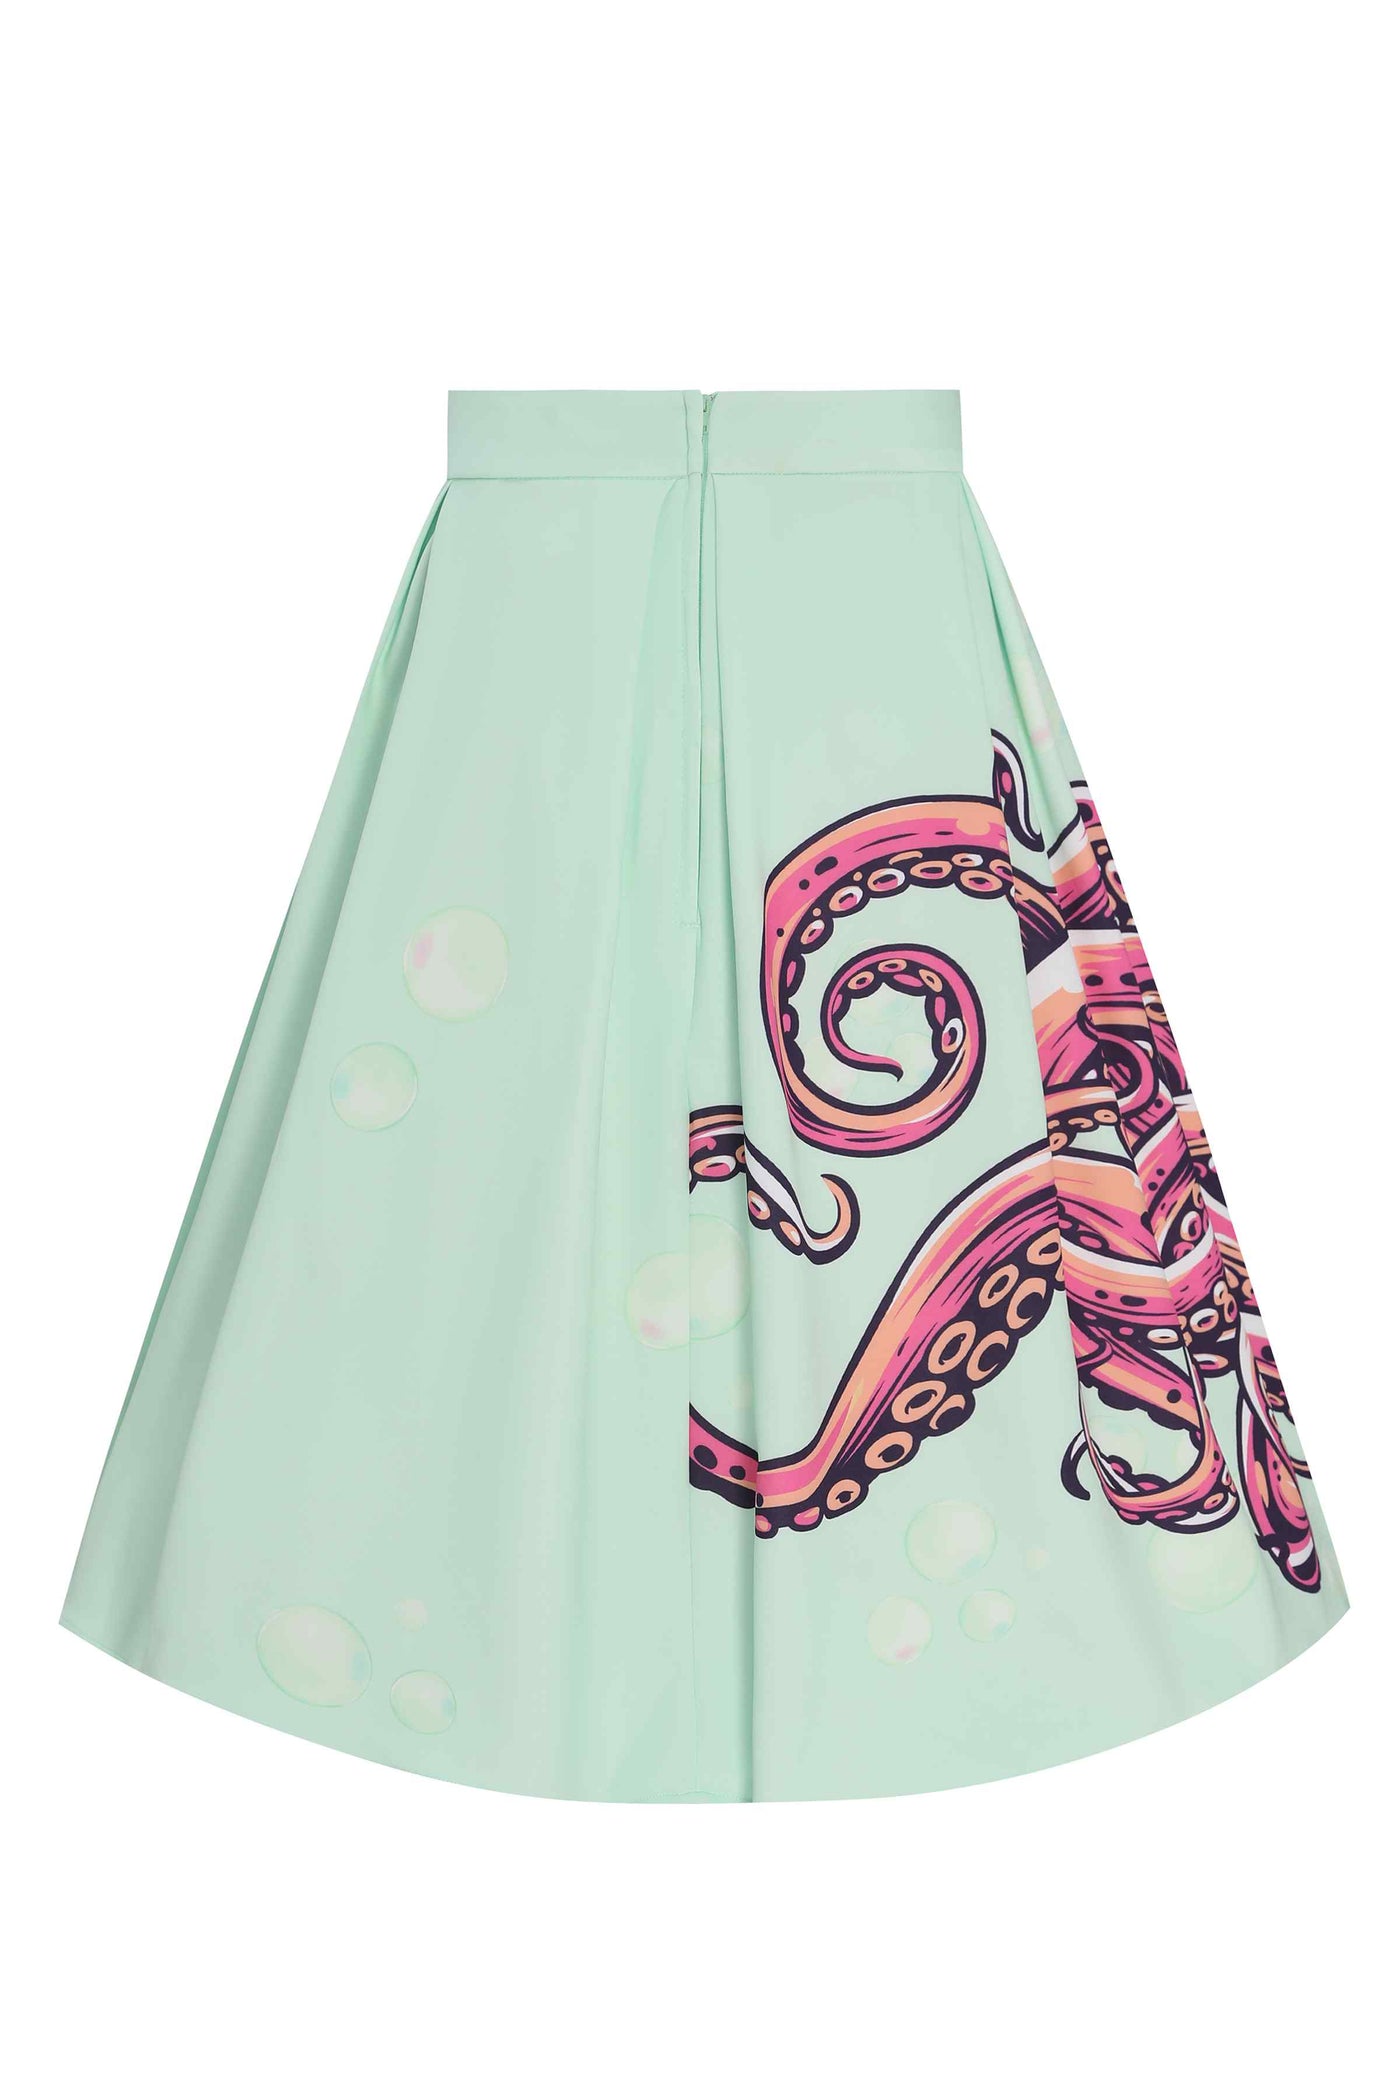 Back View of mint green with octopus print box pleated skirt